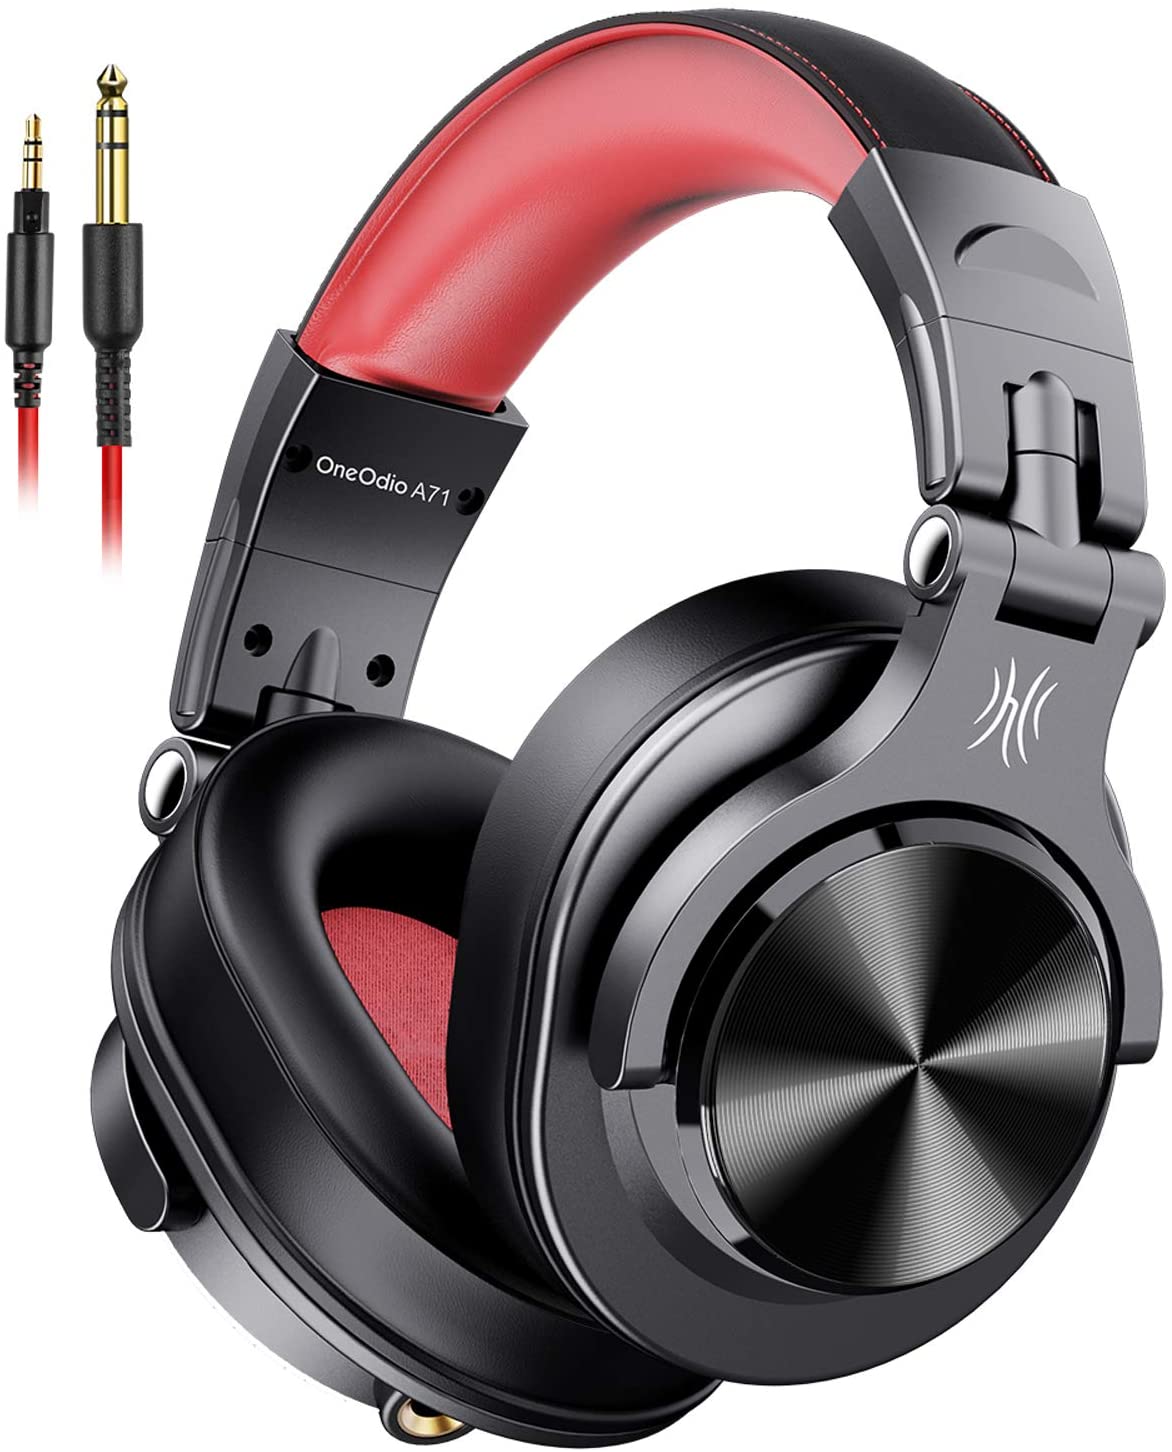 OneOdio A71 Wired Over Ear Headphones, Studio Headphones with Shareport, Monitor Recording and Foldable Headphones with Stereo Sound for Electric Drum Keyboard Guitar Amp (Black, Black Red, Silver)